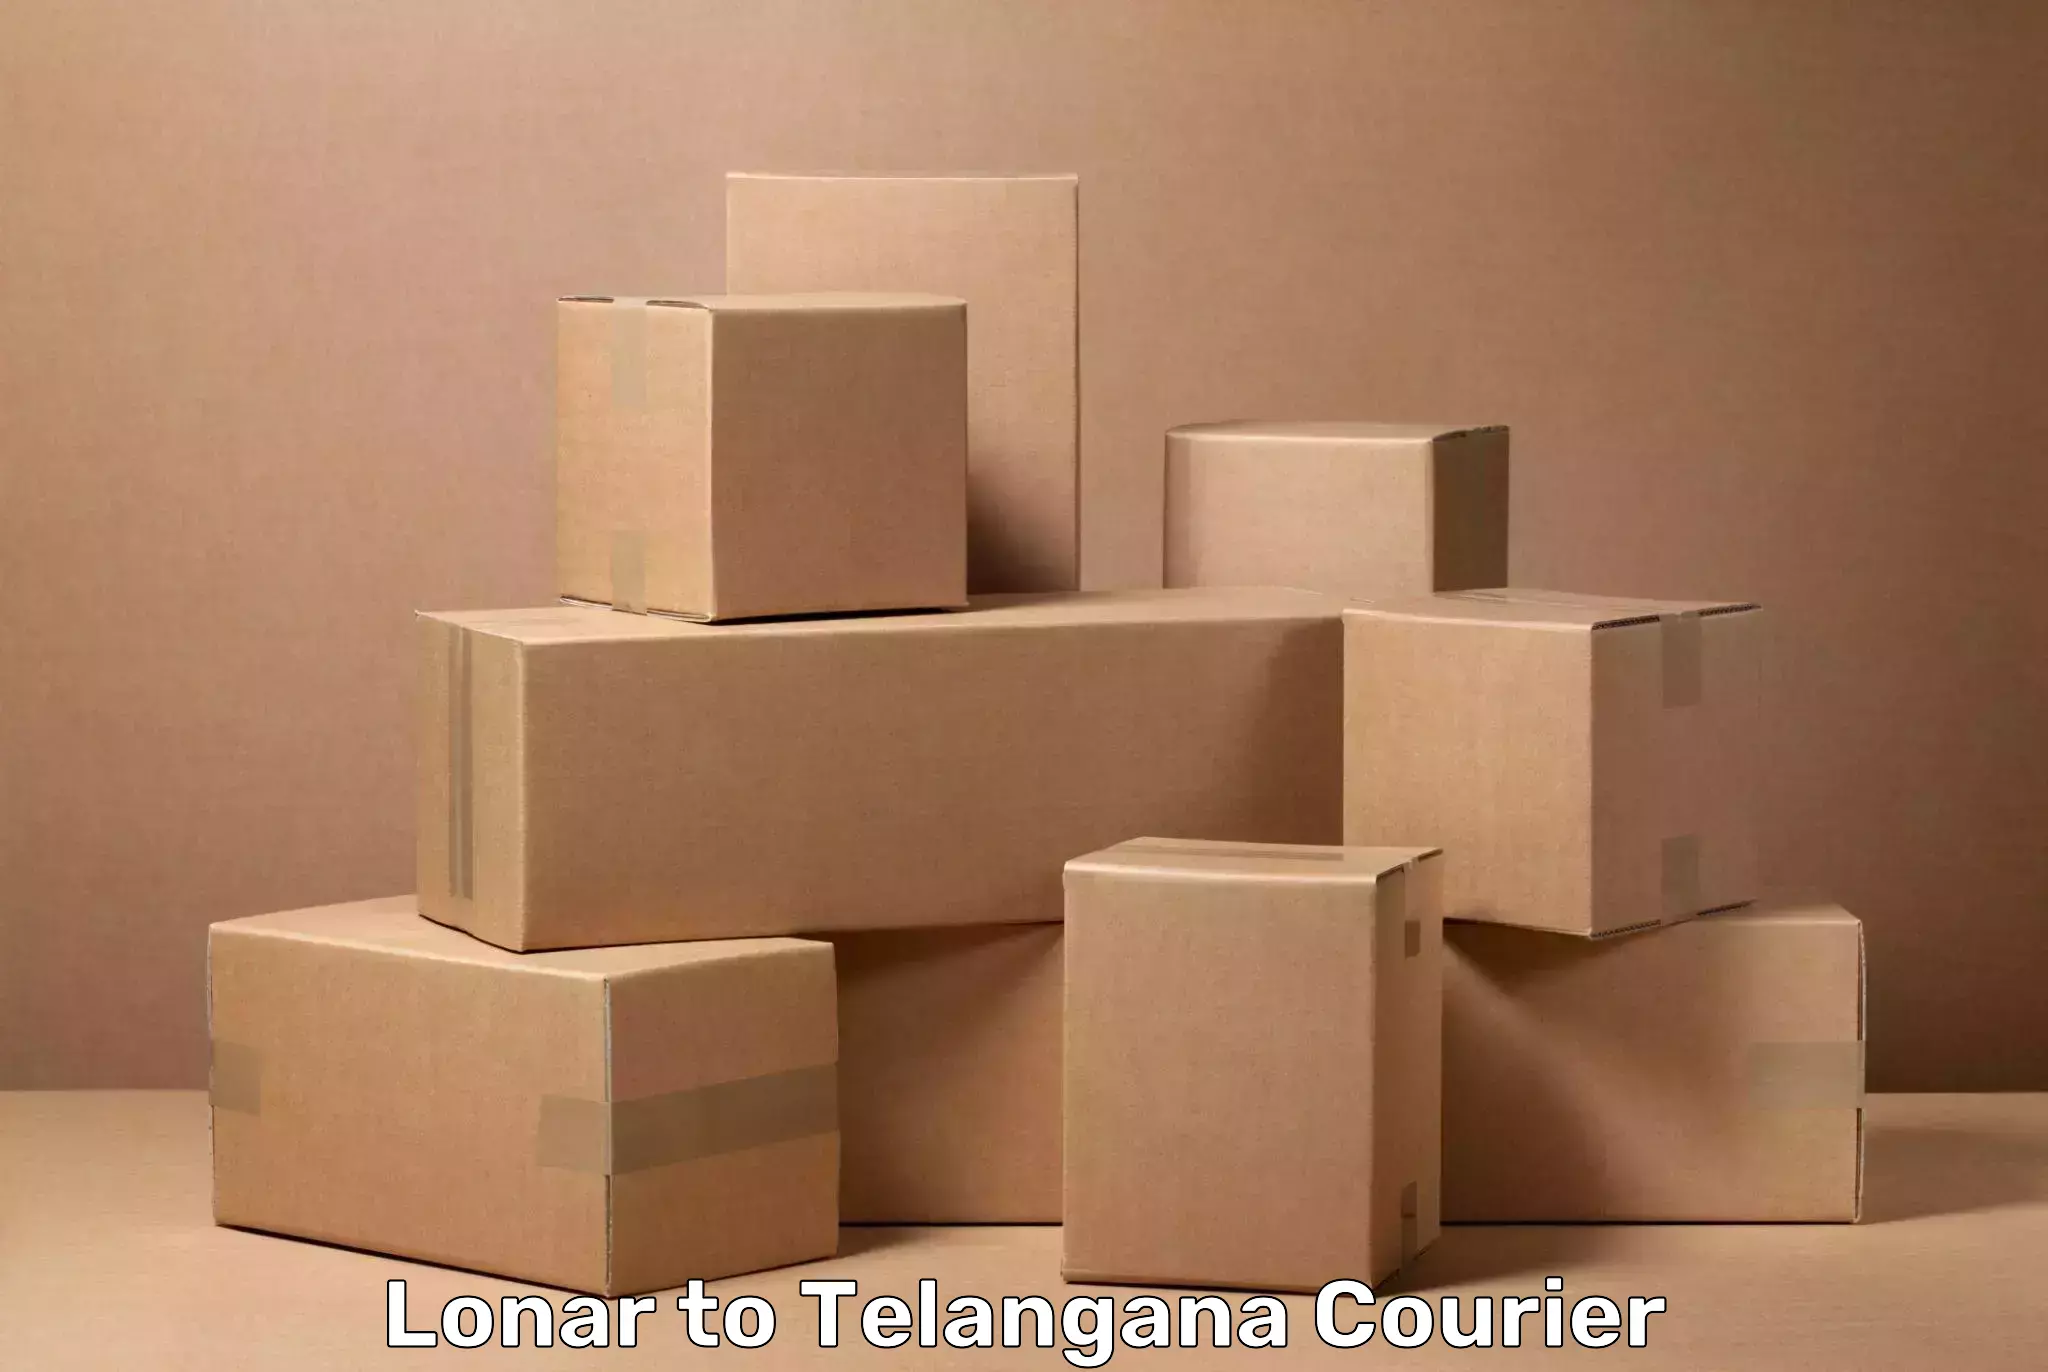 Nationwide luggage courier Lonar to Secunderabad